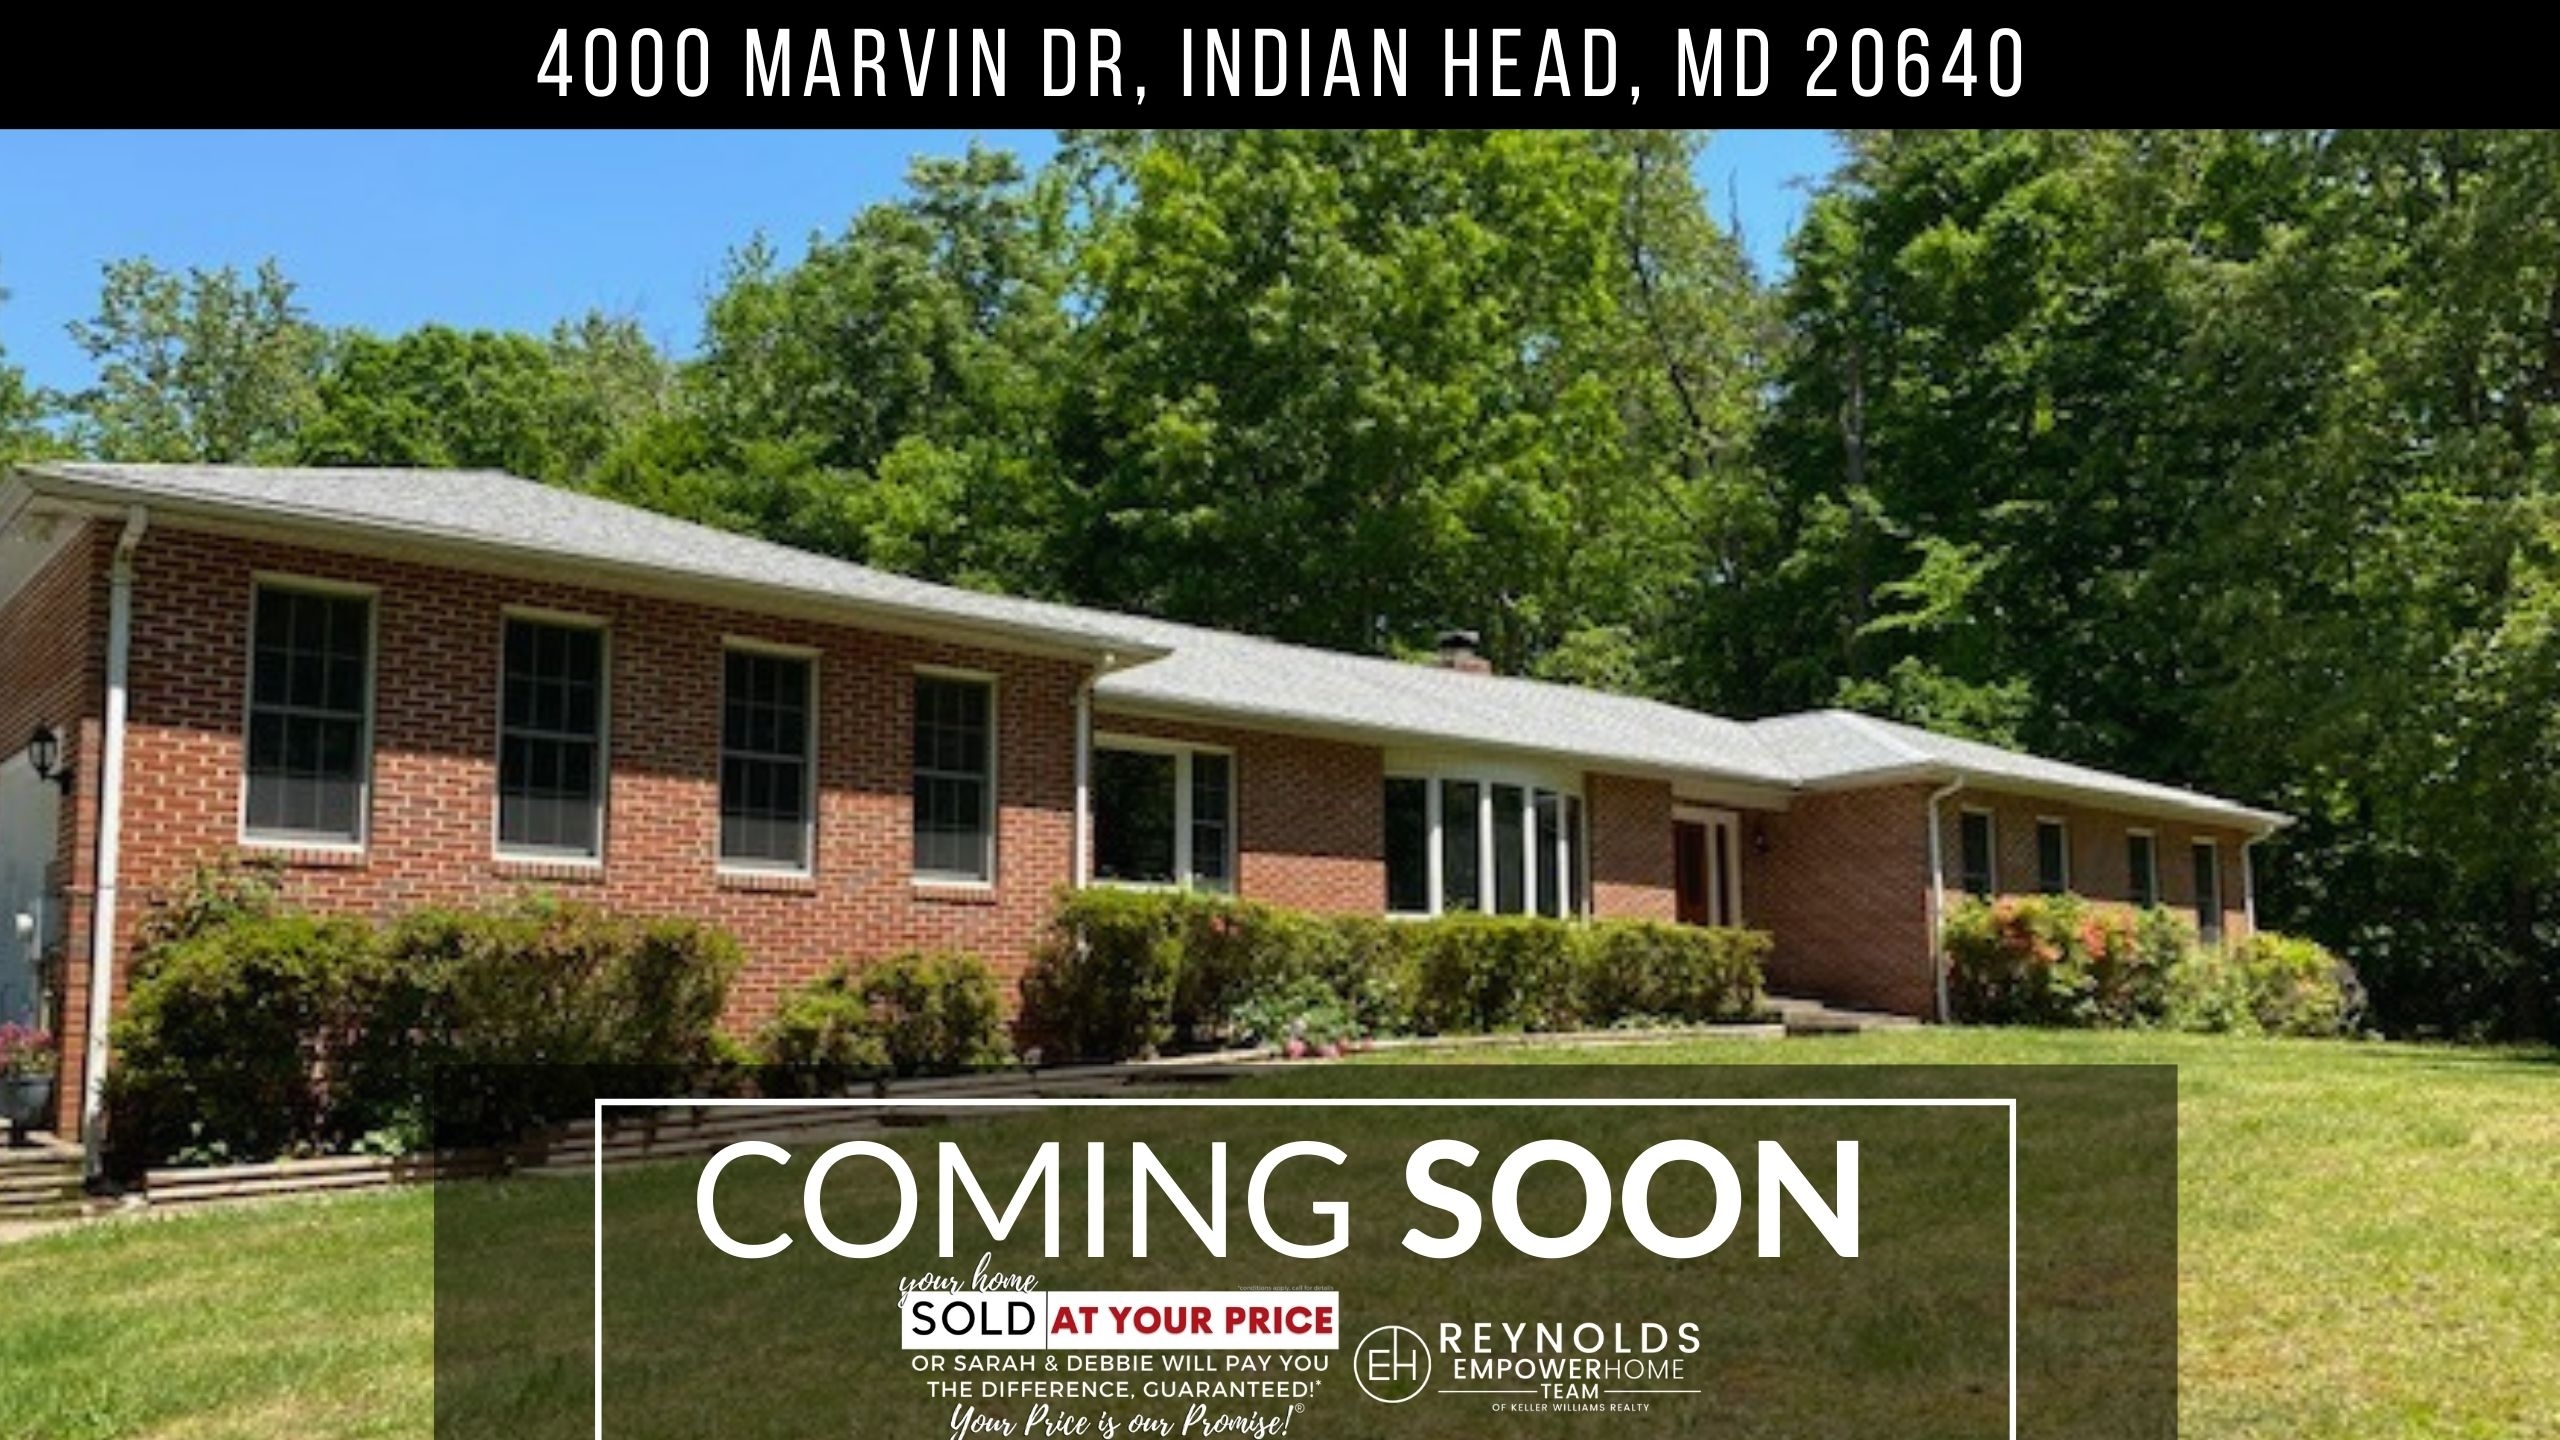 4000 Marvin Dr, Indian Head, MD 20640